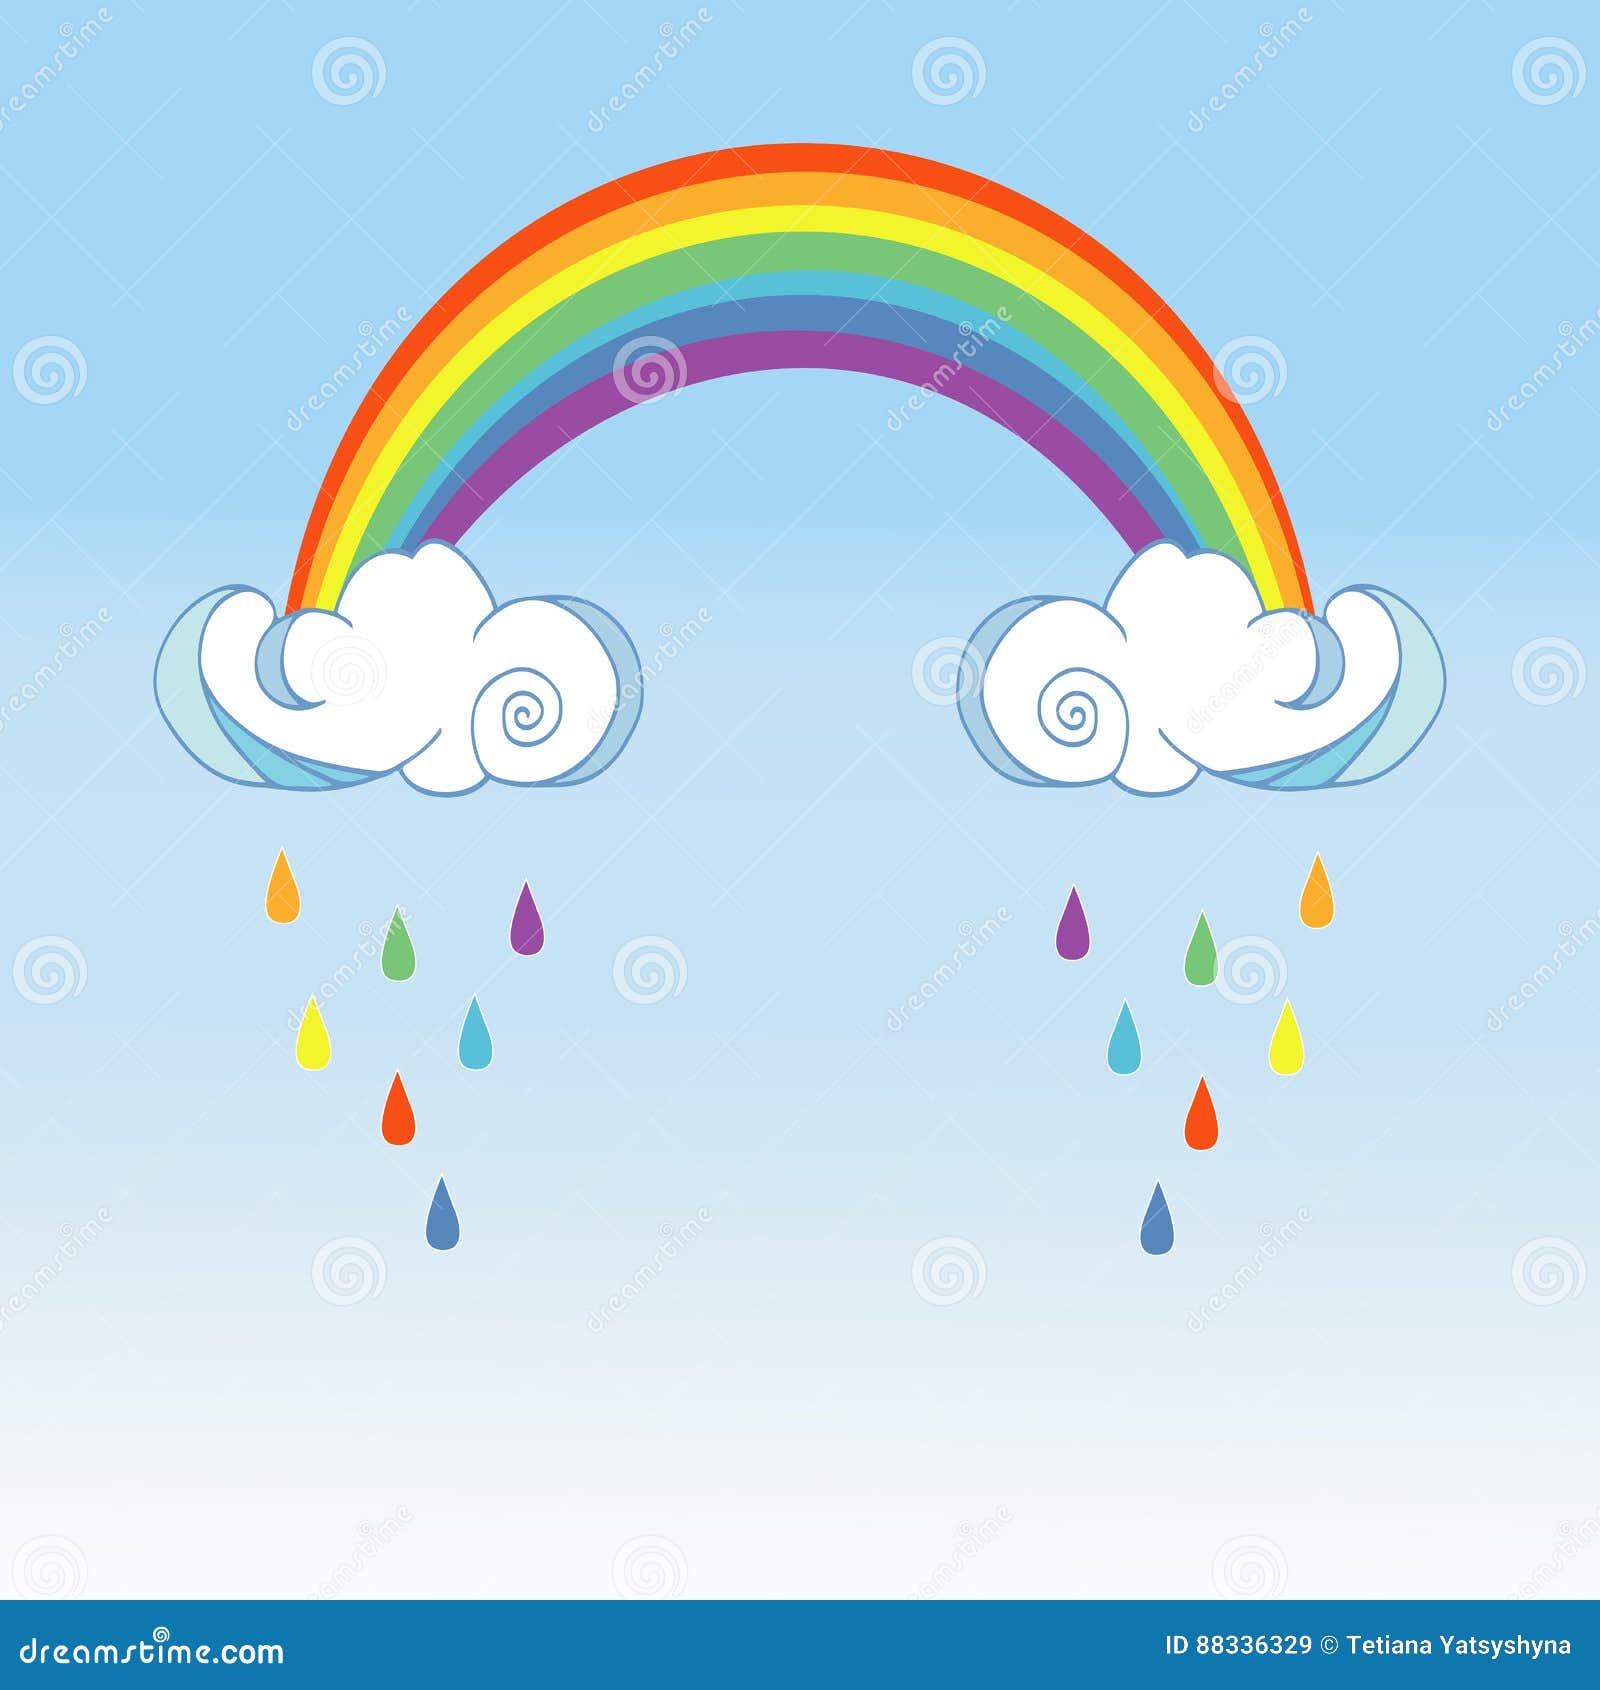 Rainbow and Raining Clouds on Color Background. Cute Cloud Poster ...